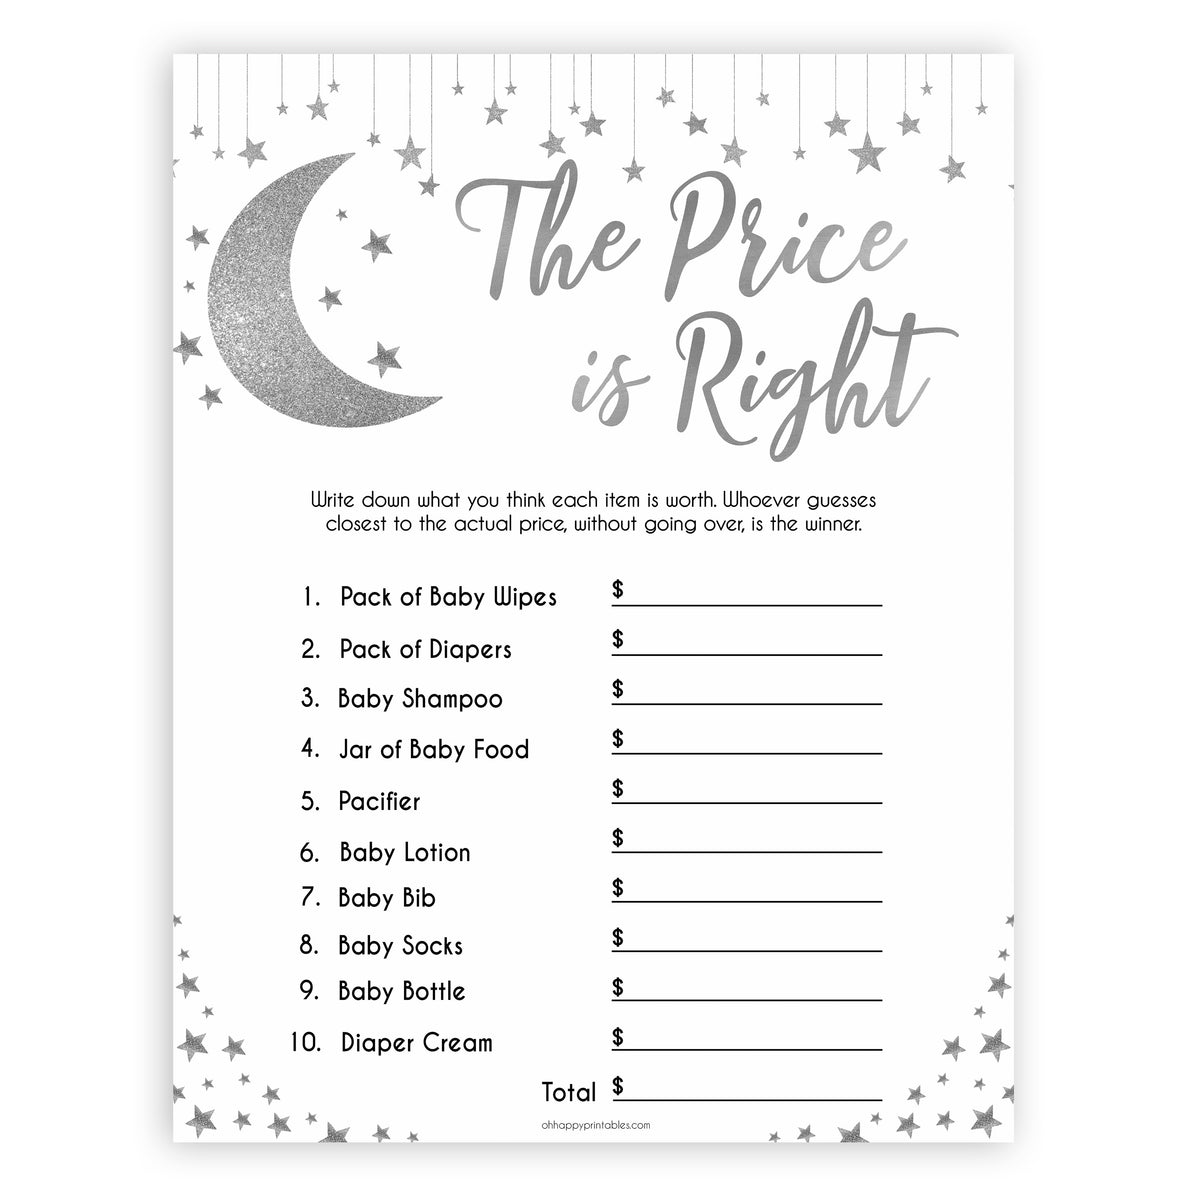 Silver little star, the price is right baby games, baby shower games, printable baby games, fun baby games, twinkle little star games, baby games, fun baby shower ideas, baby shower ideas